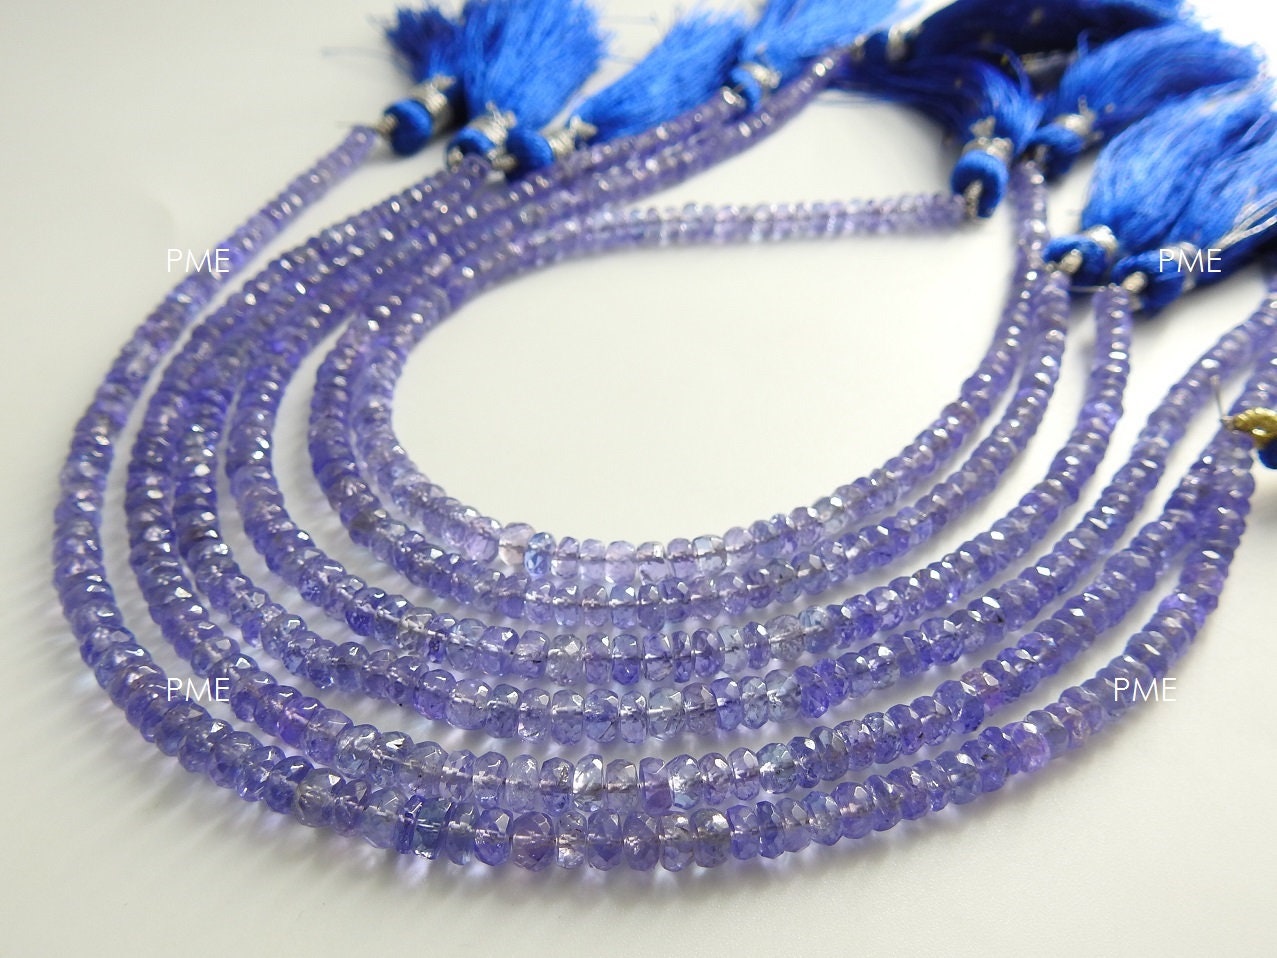 Tanzanite Faceted Roundel Bead,Blue,Handmade,Loose Stone,High Quality,Gemstone Bead,For Jewelry Making 100%Natural 9Inch Strand PME(B8) | Save 33% - Rajasthan Living 16